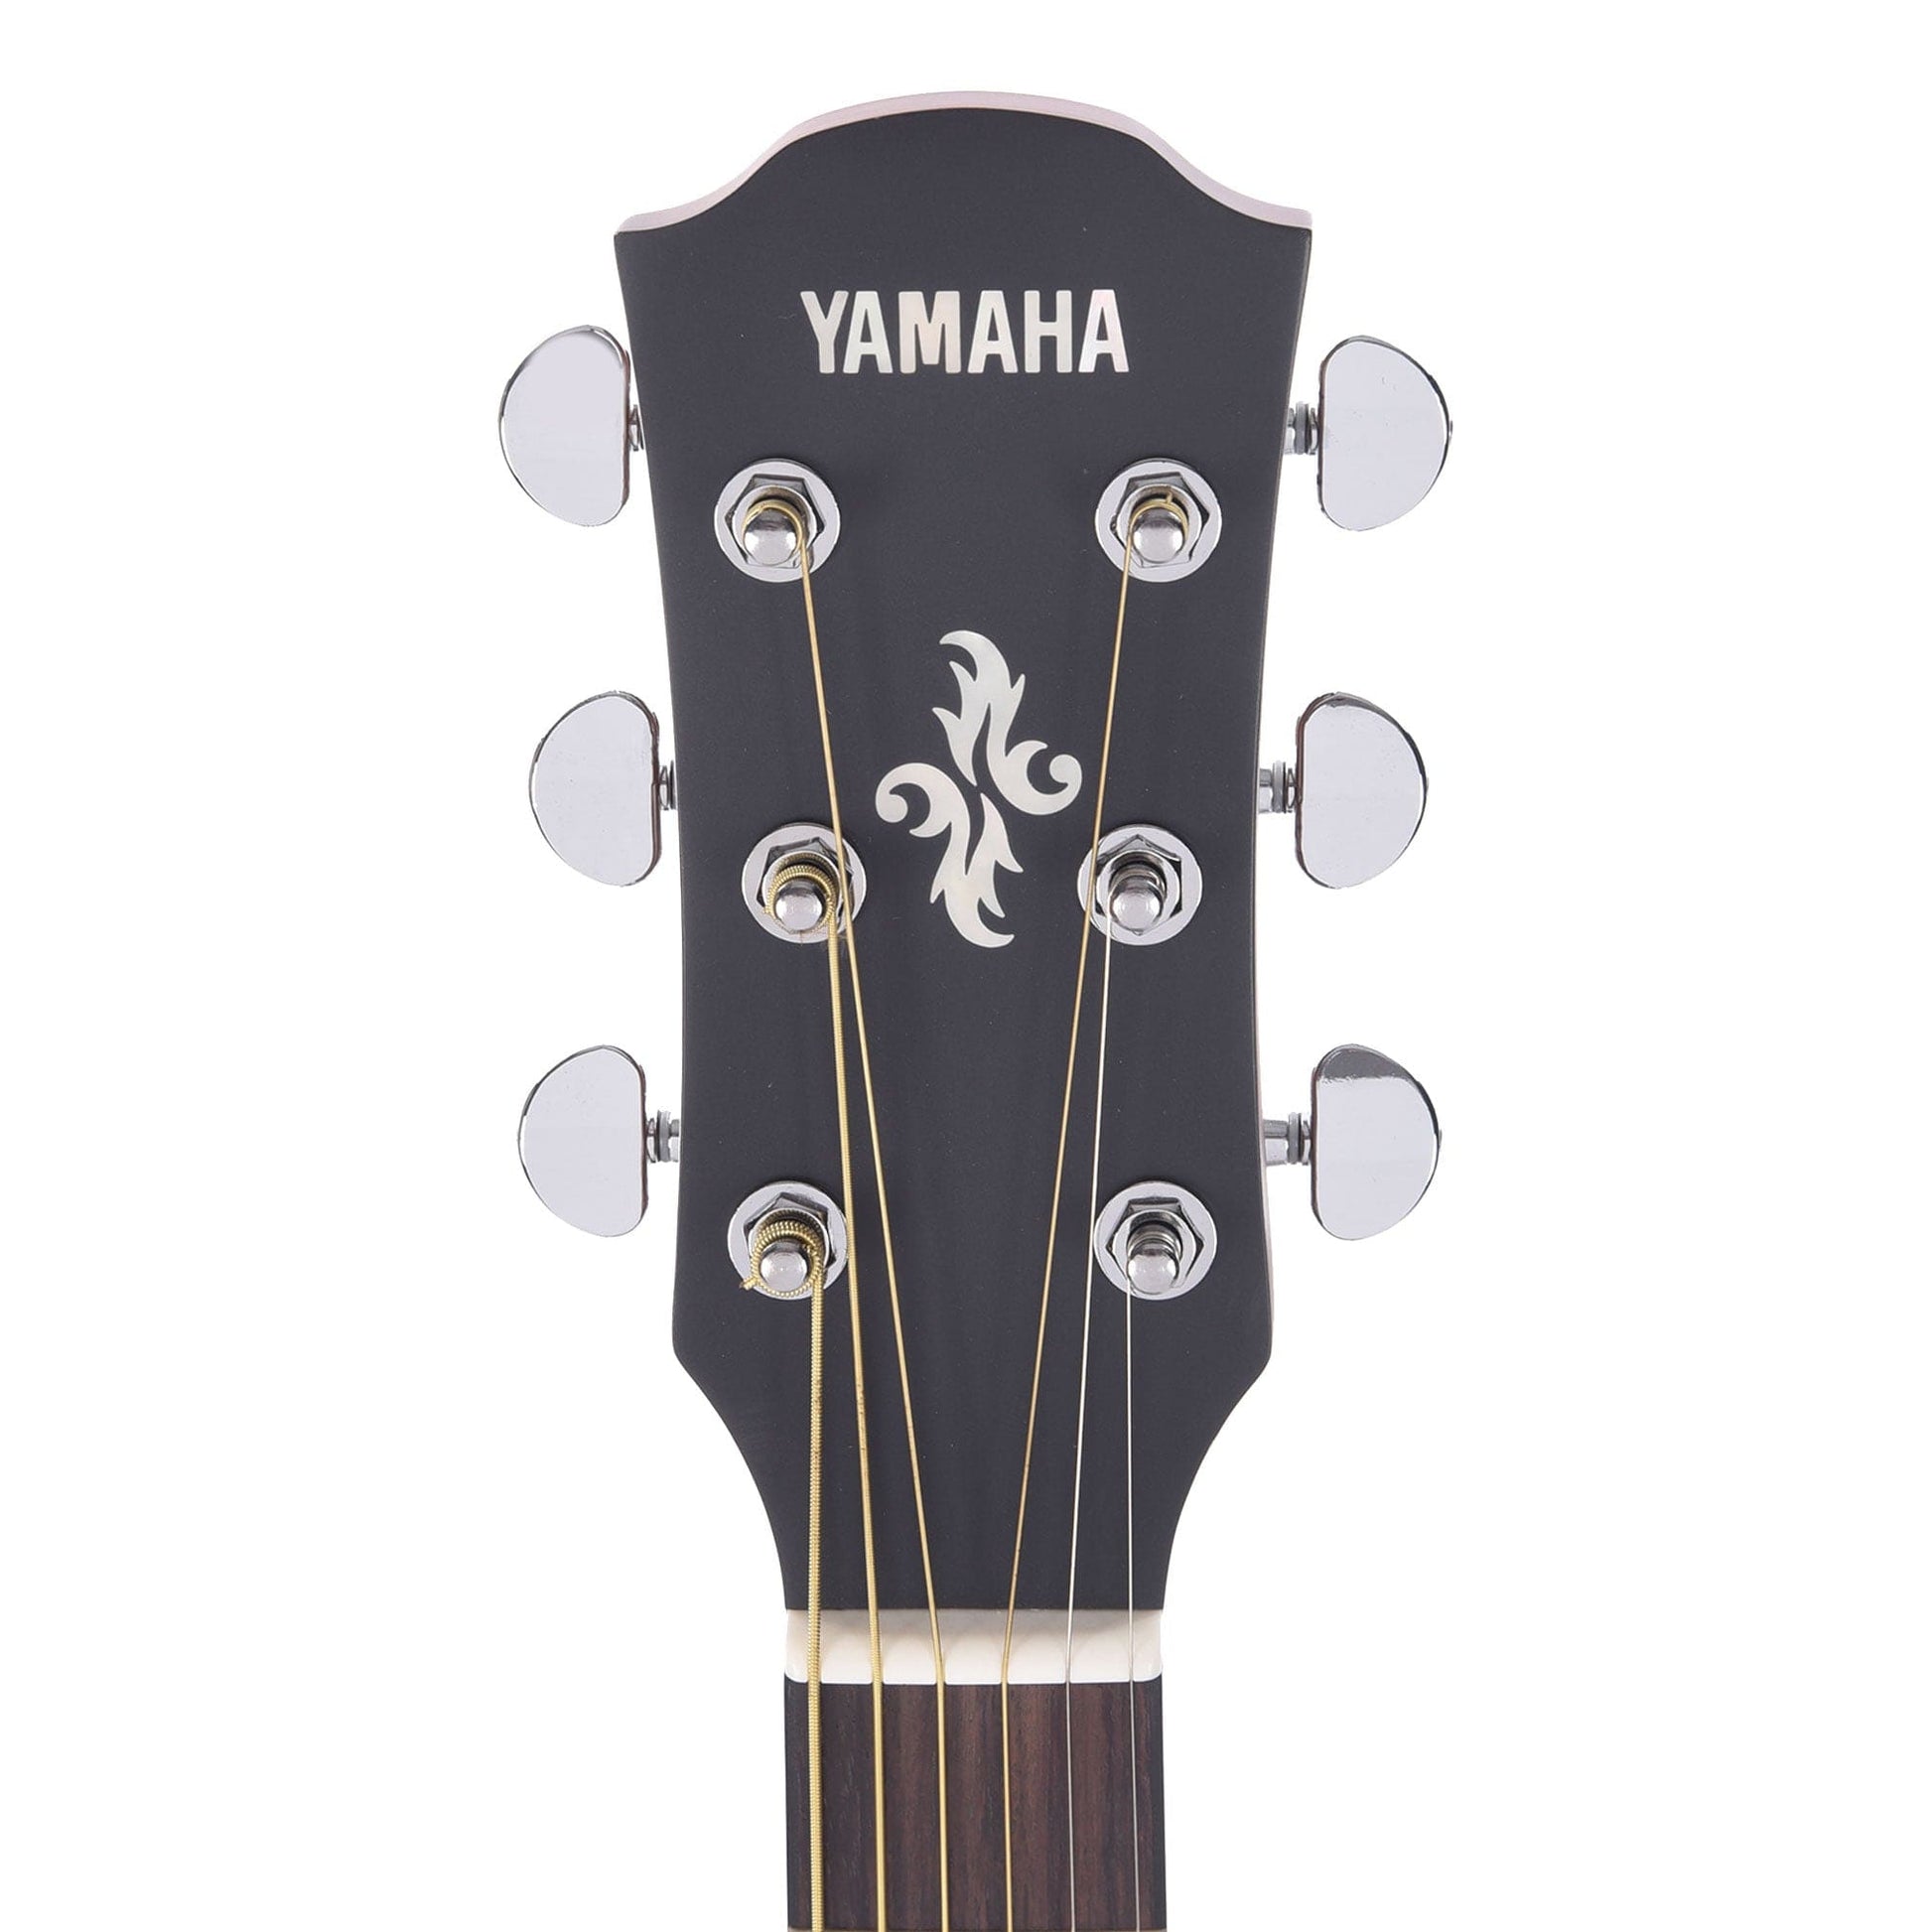 Yamaha APX600M Thinline Acoustic/Electric Guitar Smoky Black Acoustic Guitars / Built-in Electronics